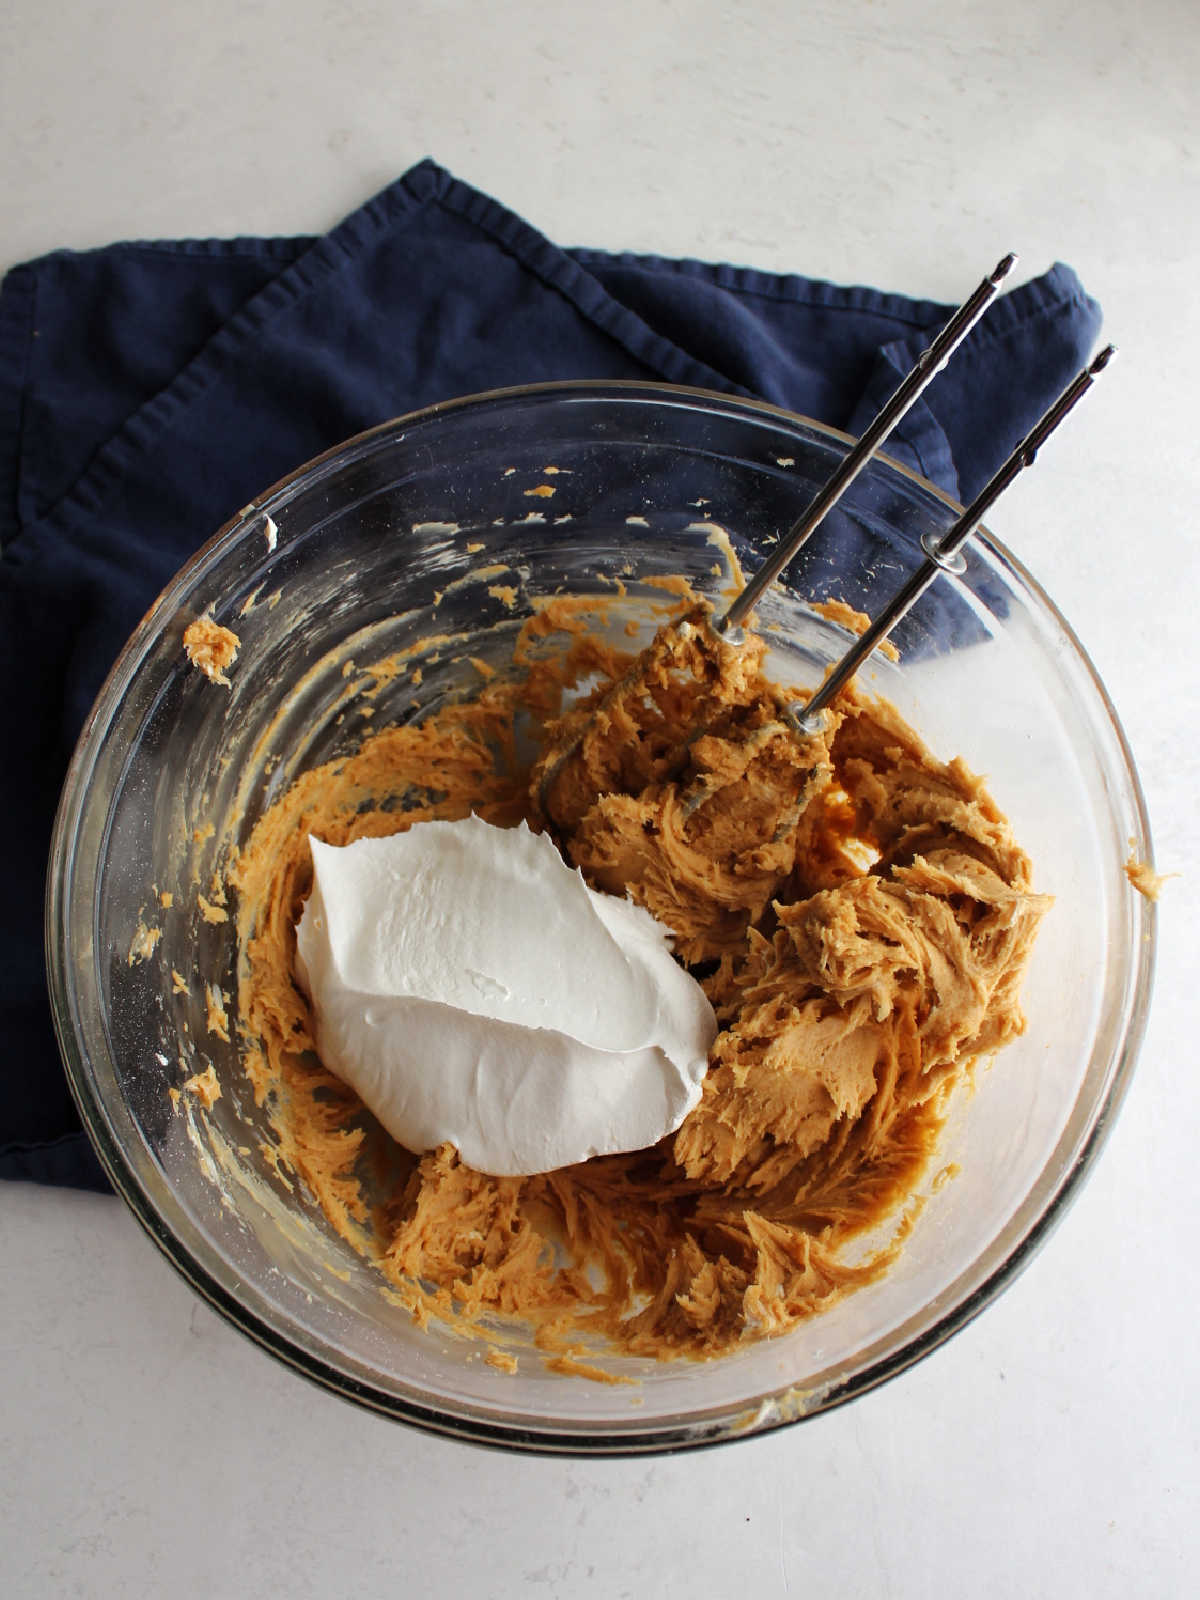 Adding cool whip to peanut butter and cream cheese mixture.